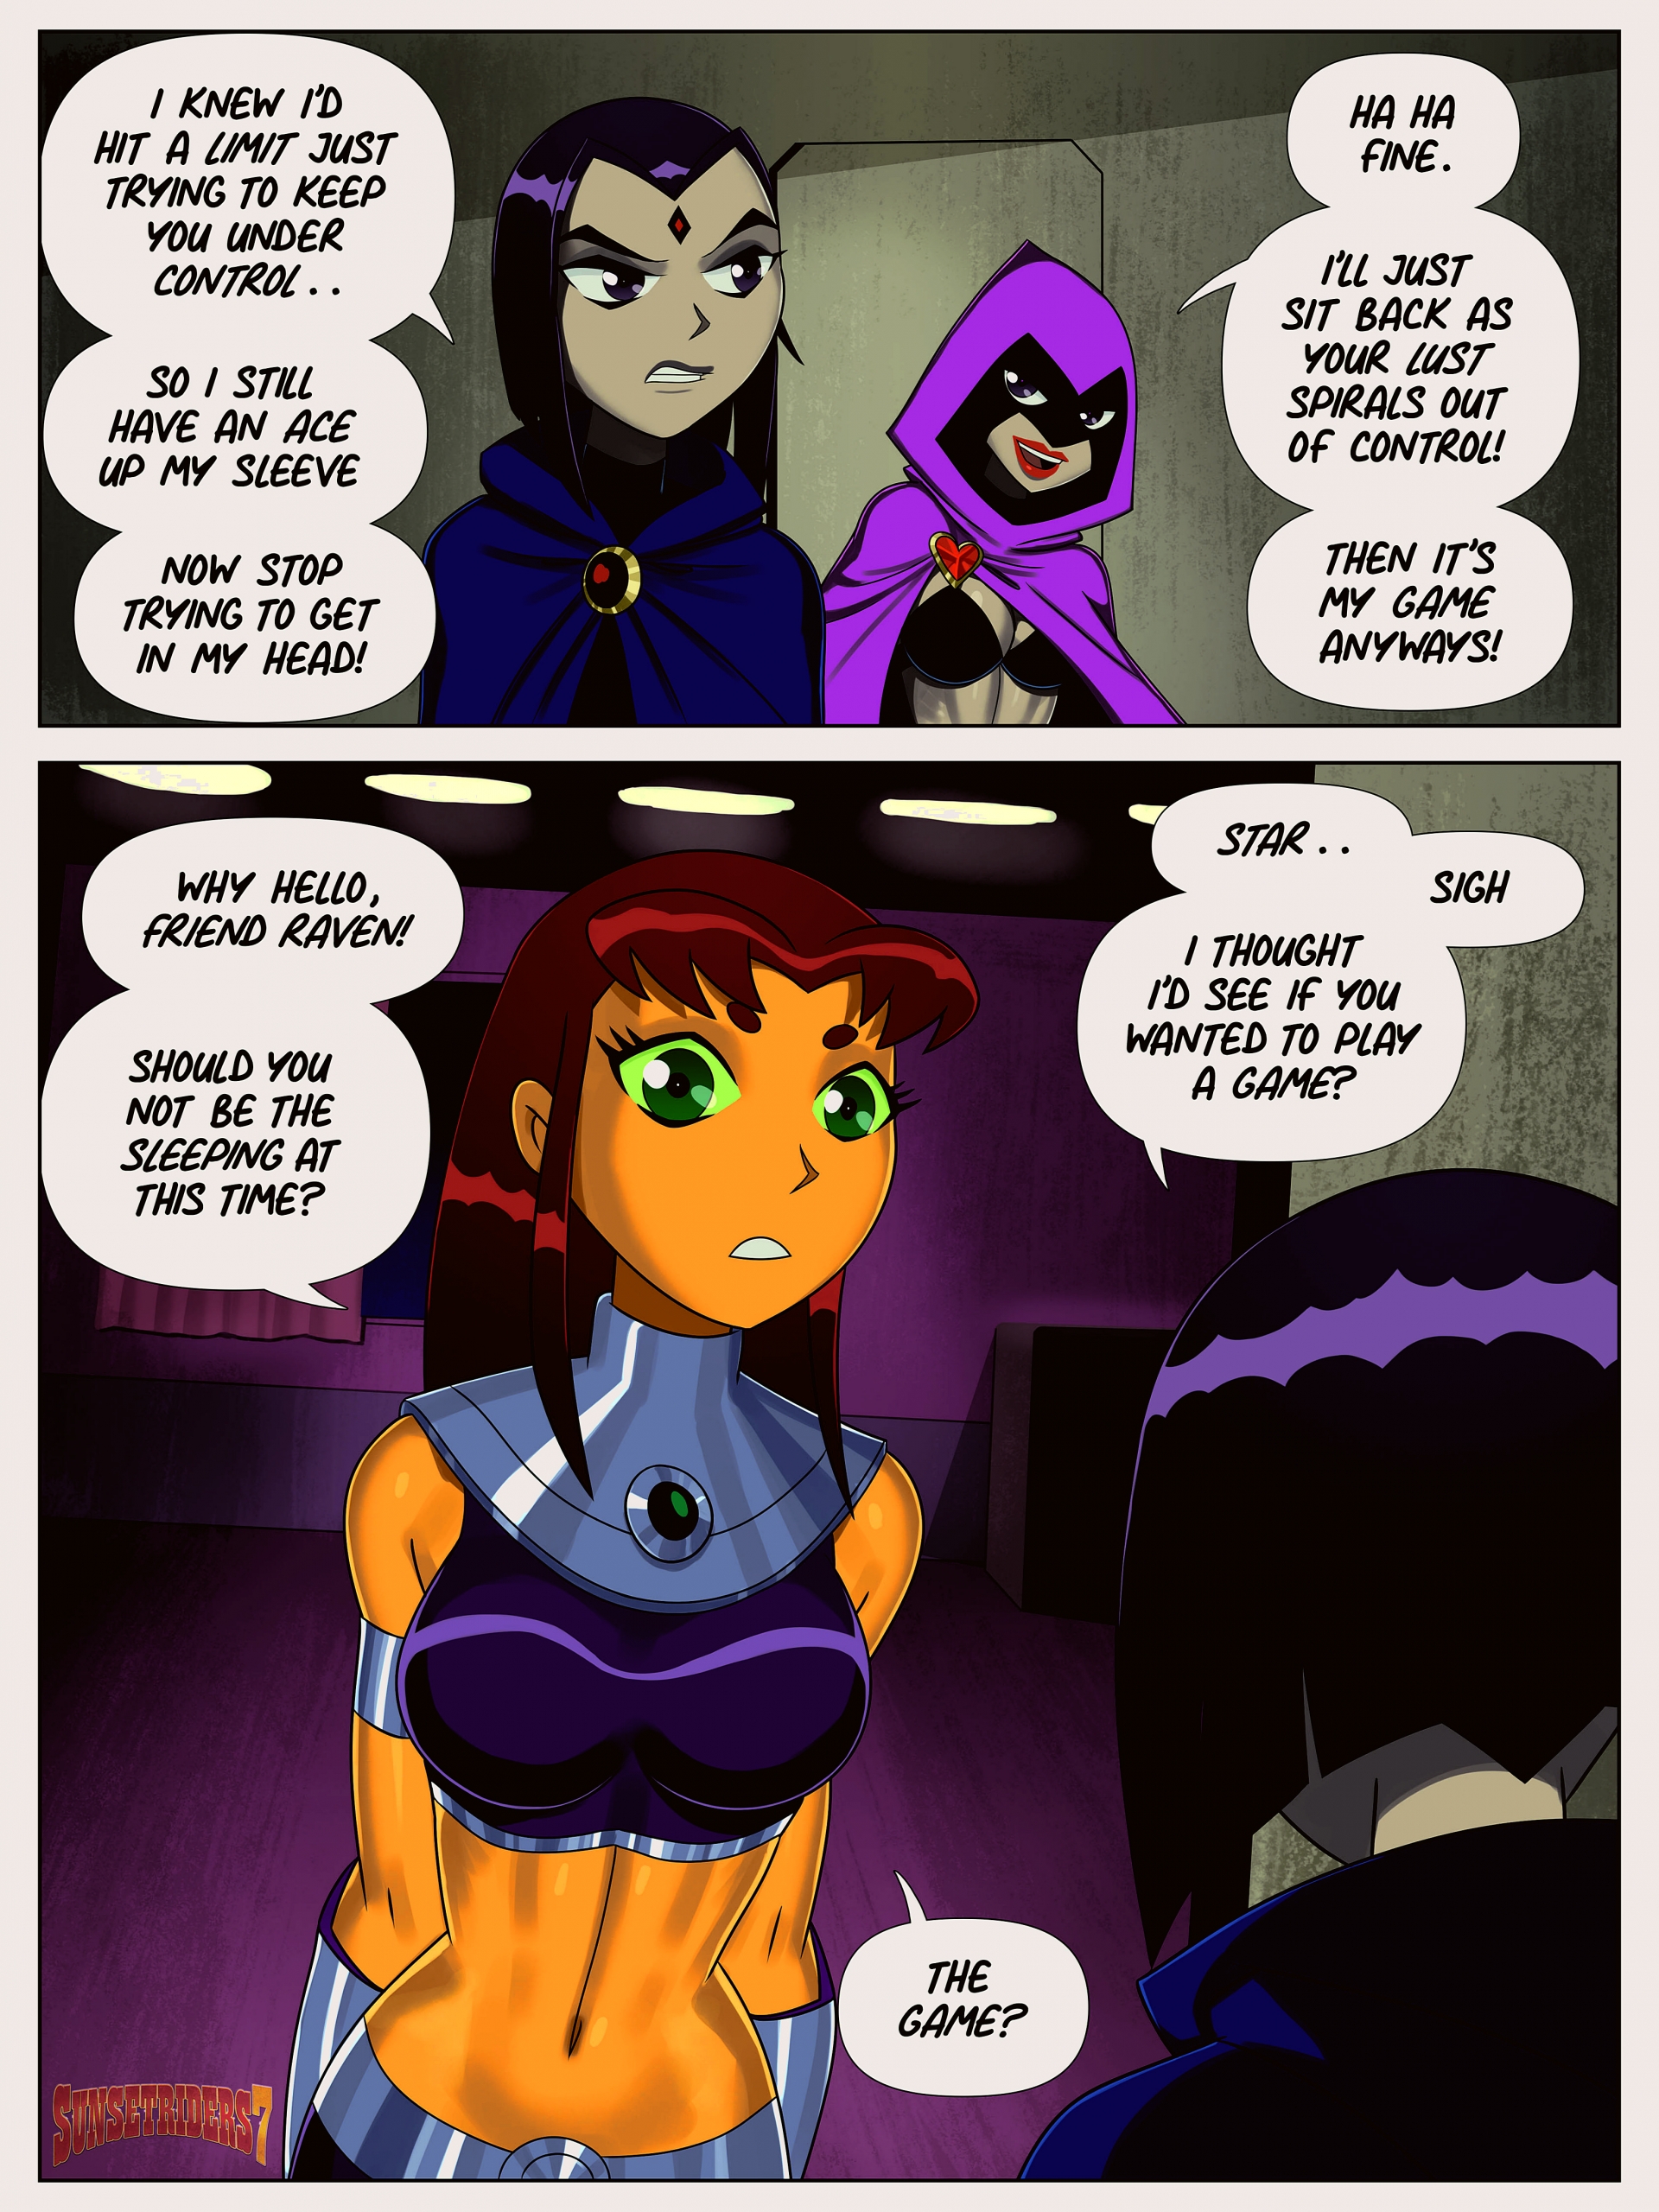 Starfire the Terrible porn comic page 00005